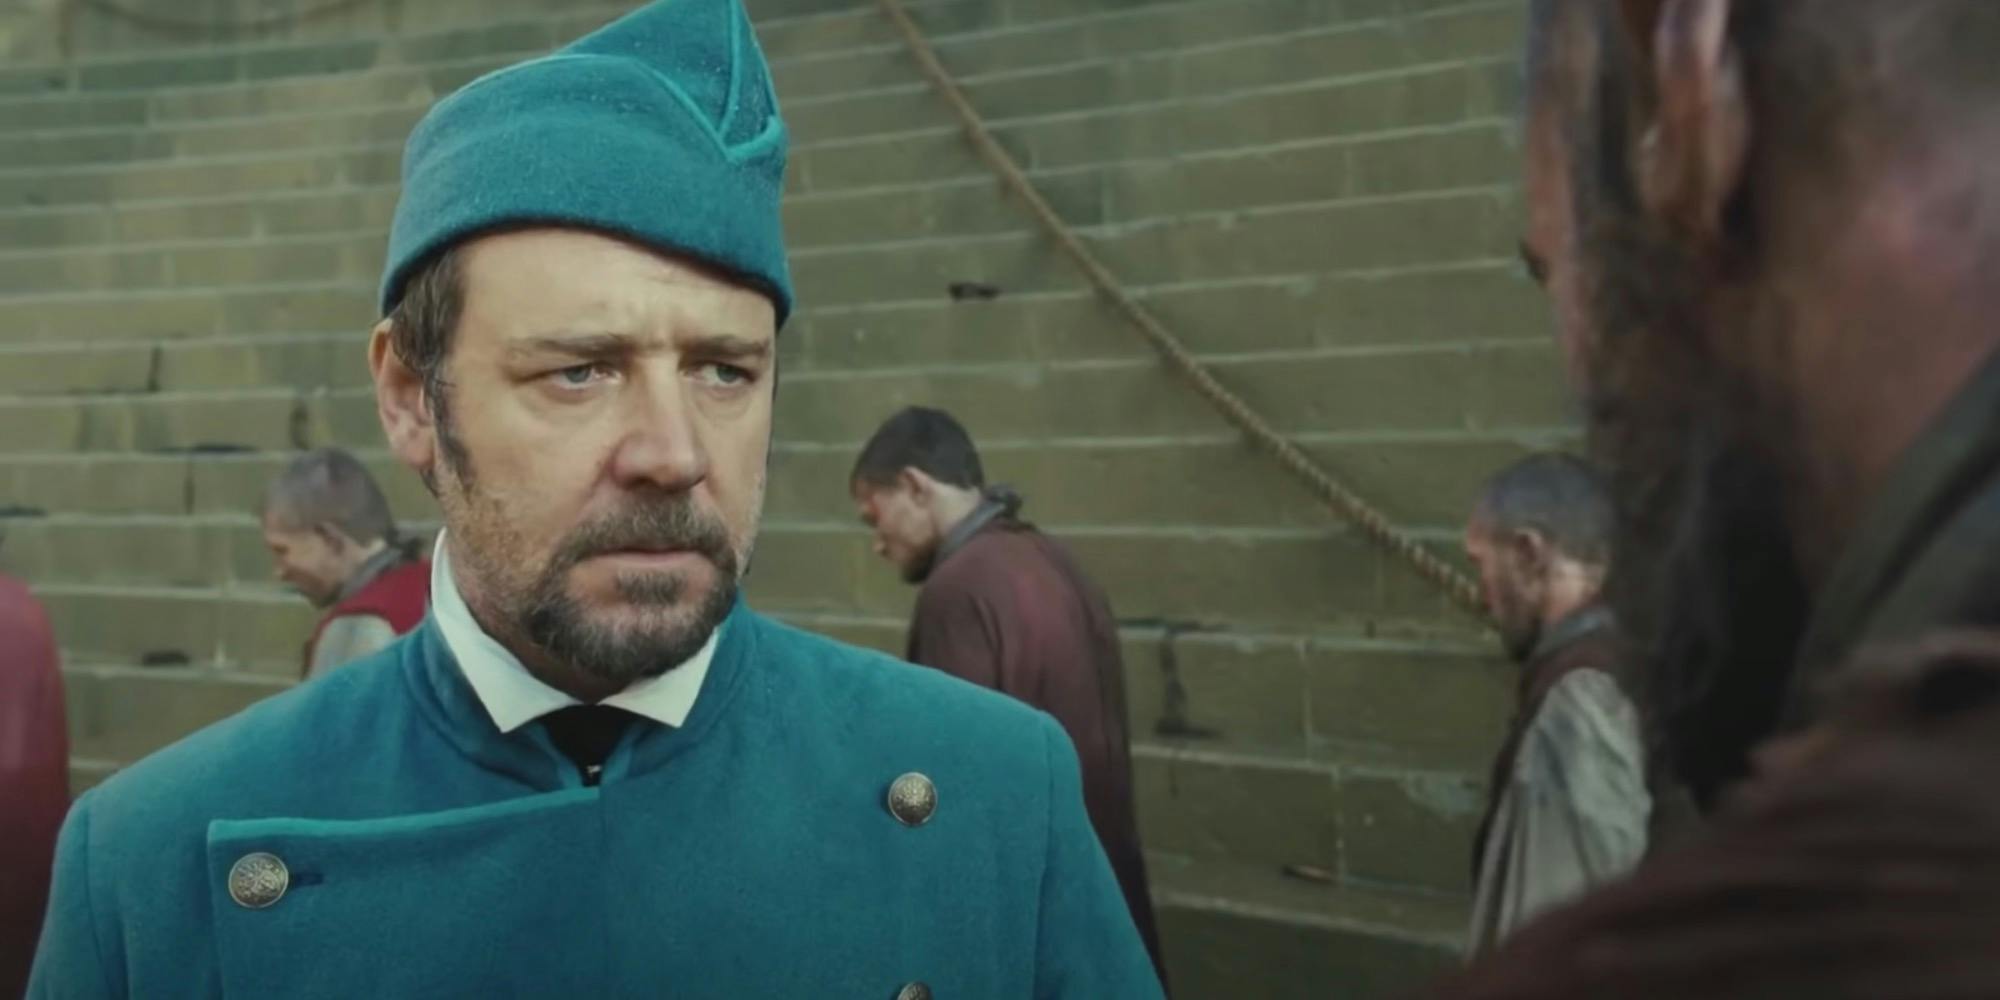 Still of Russell Crowe in Les Misérables, the movie based on the Victor Hugo novel.